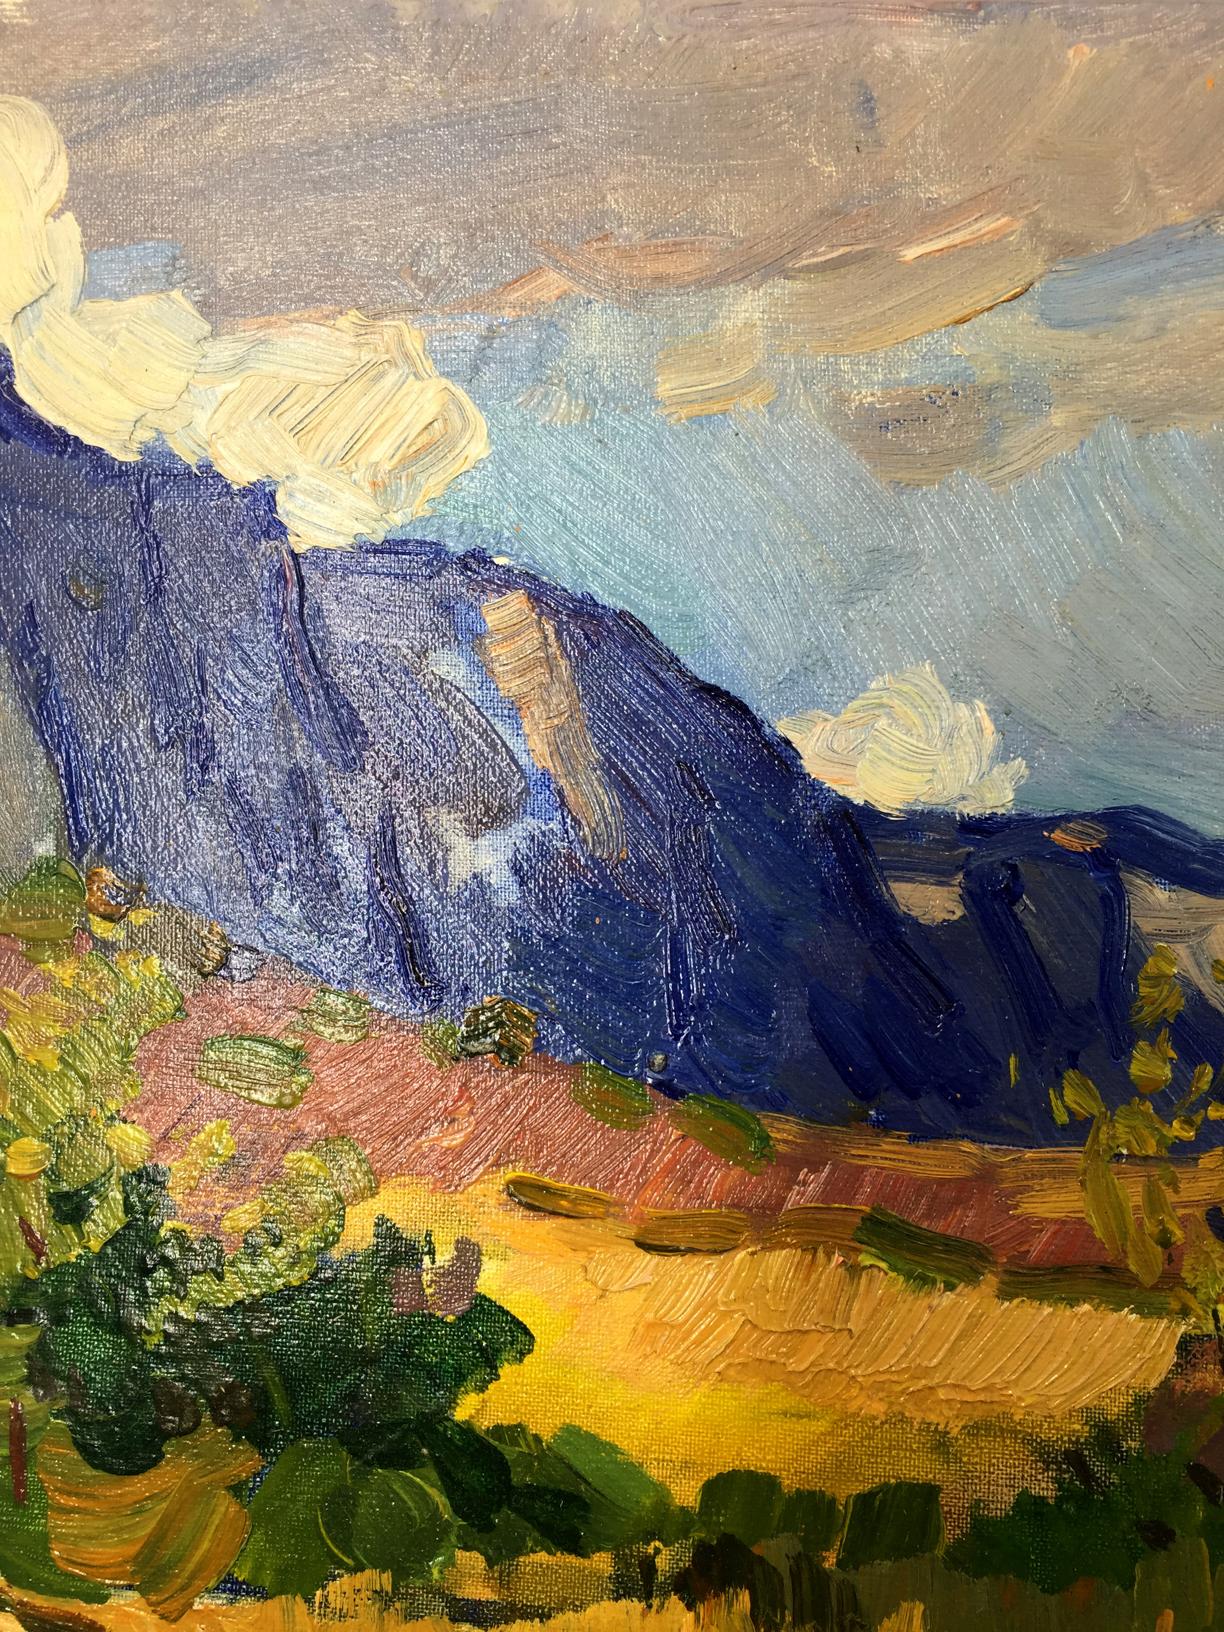 Oil painting The mountains Gomol'skiy G. S.